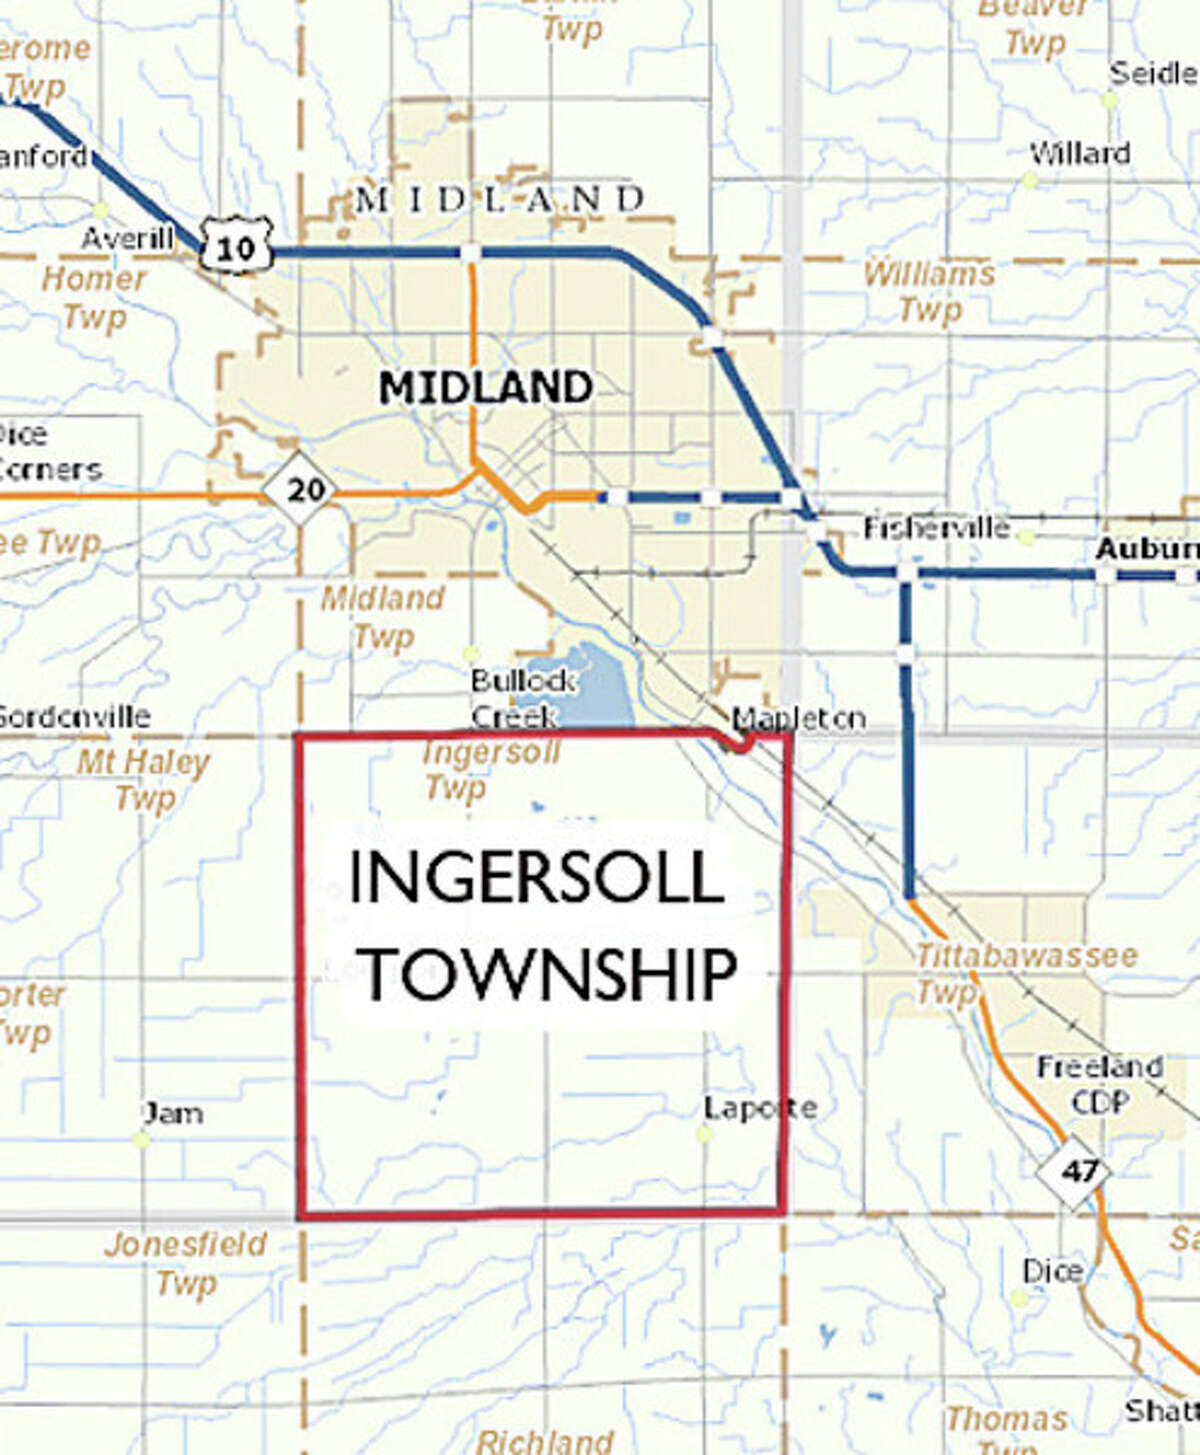 MICHIGAN.GOV A map of Ingersoll Township, outlined in red. A town hall meeting on the turbine issue is scheduled for March 22.